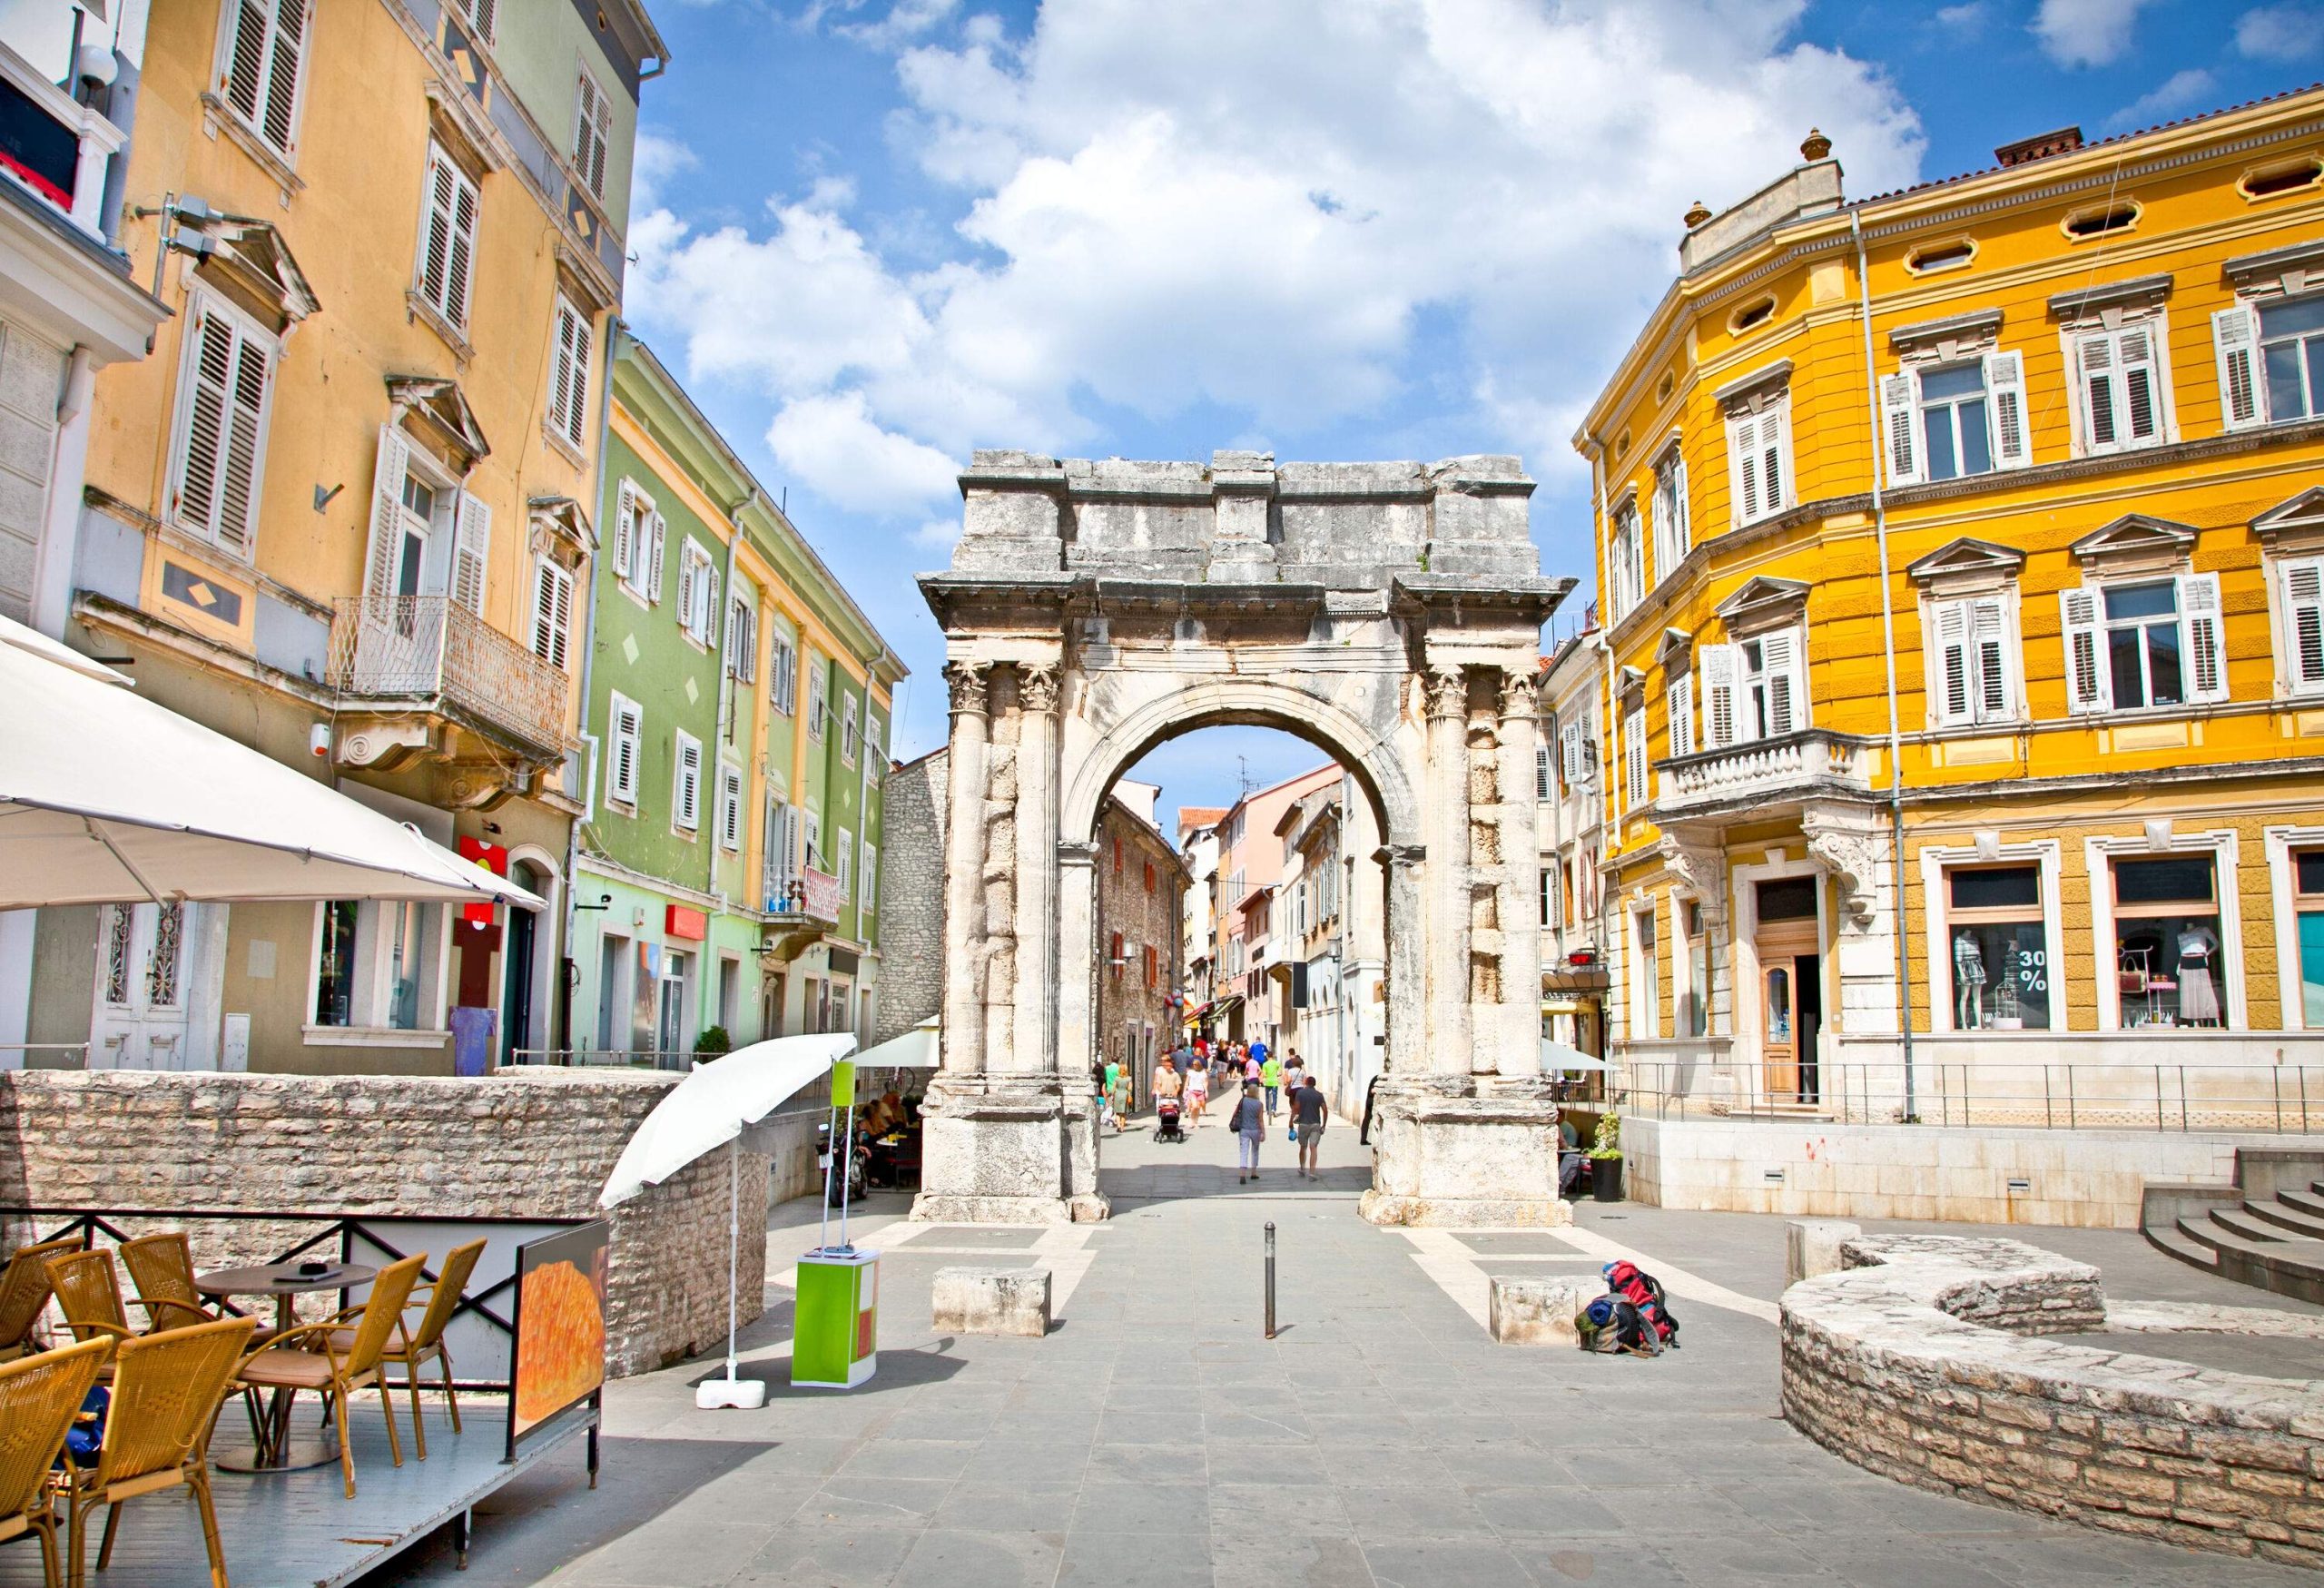 As they make their way along a street lined with bright buildings, individuals pass beneath an ancient archway.